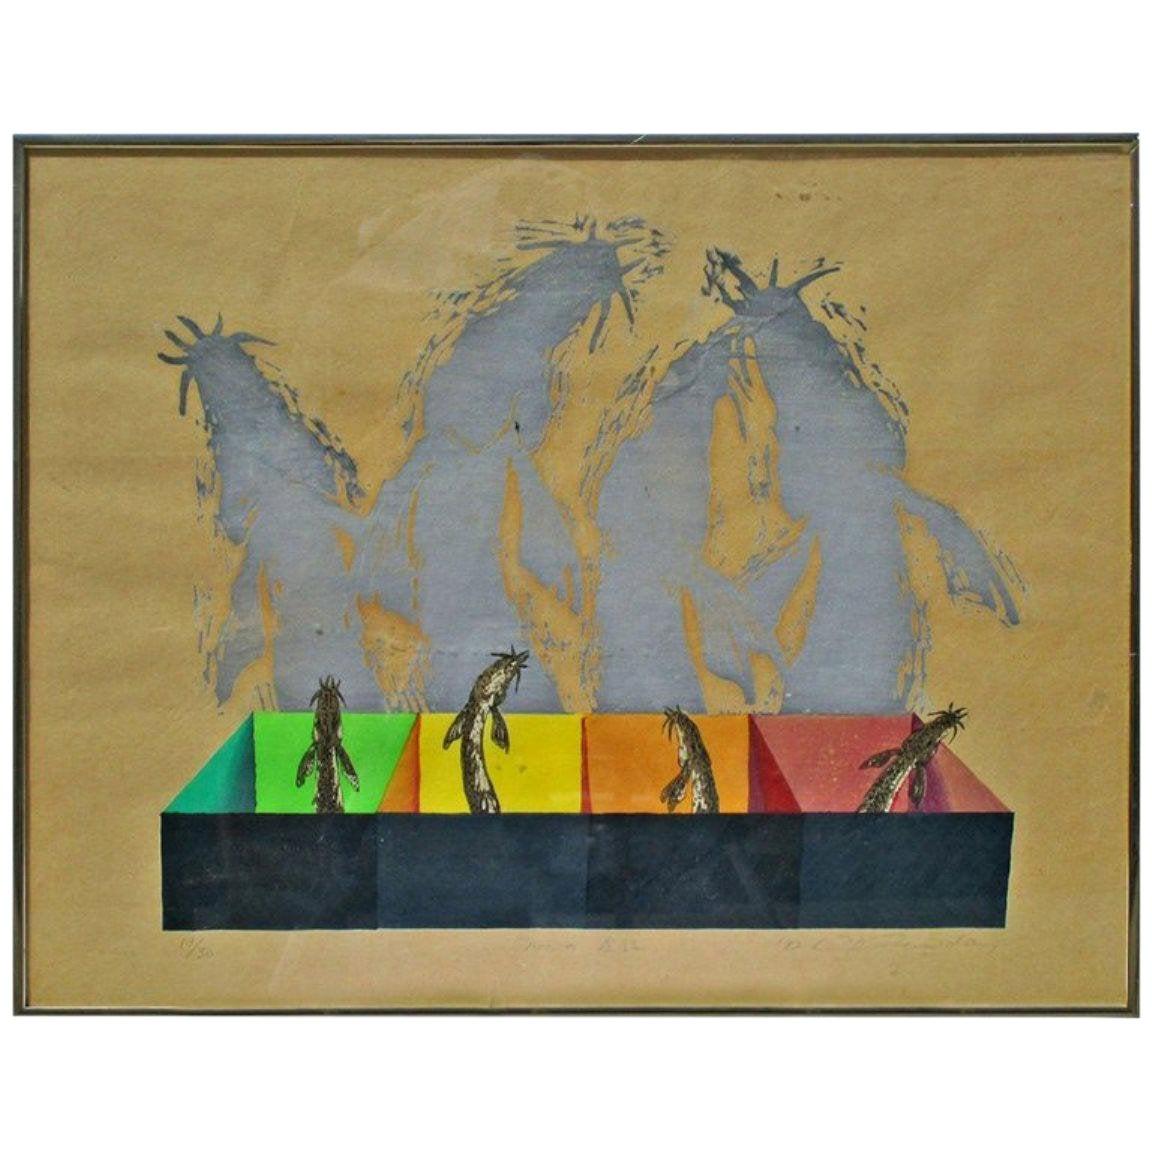 Midcentury colorful representation of 4 coy fish by Chinese artist (signed and dated). Painted on silk. Framed and exhibited in Honk Kong. Numbered 13/30. 